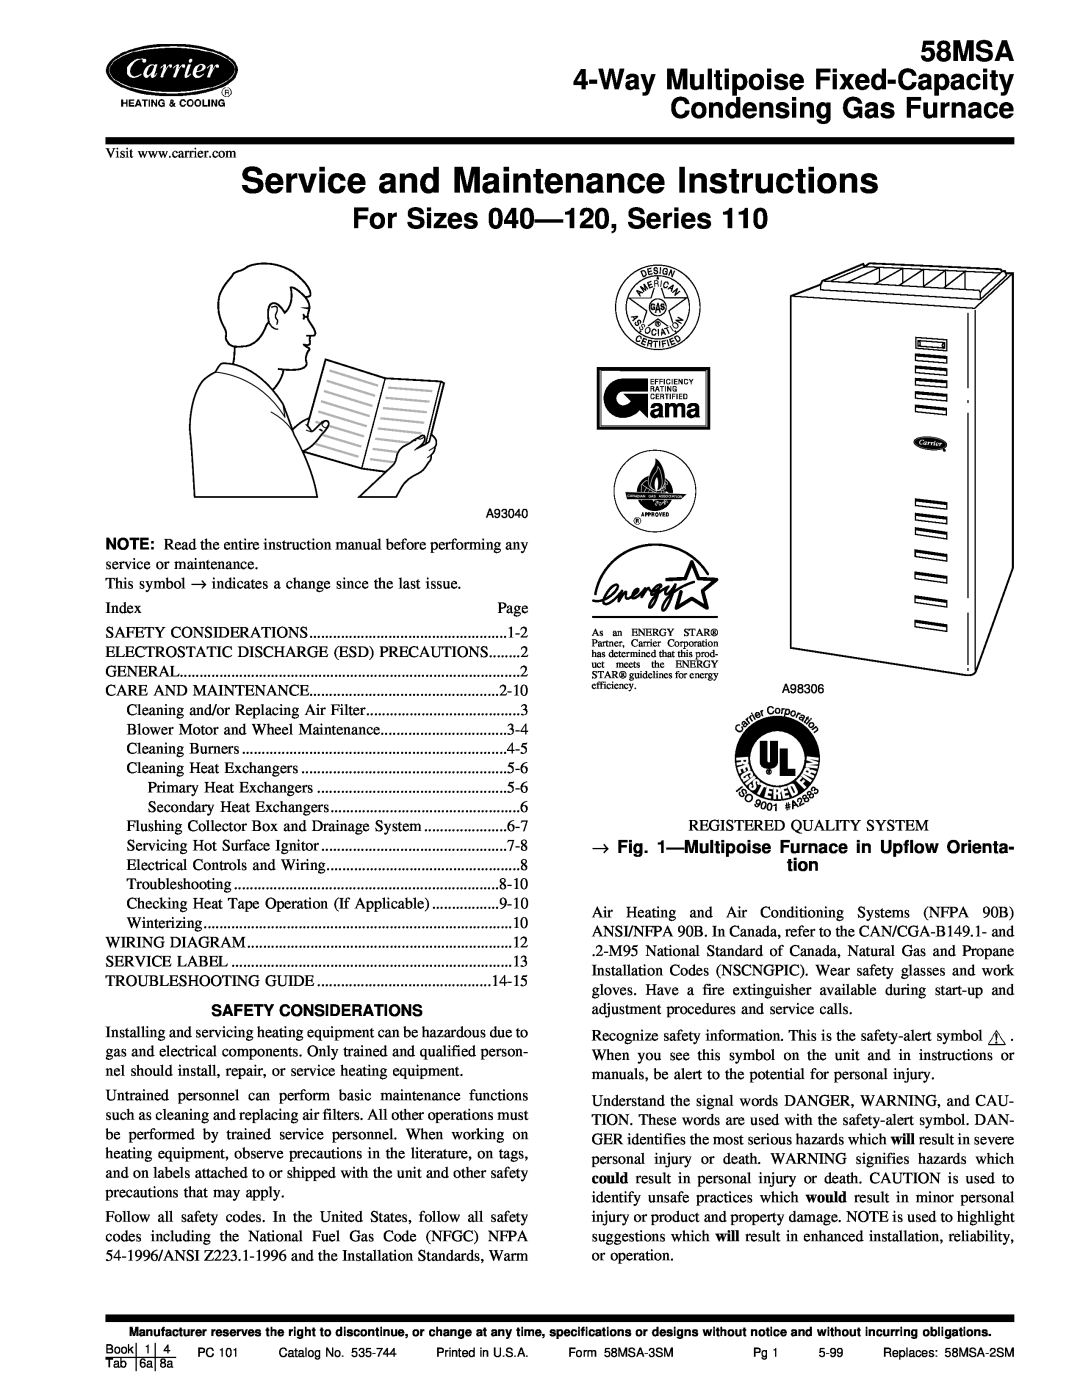 Carrier 58MSA instruction manual Service and Maintenance Instructions, For Sizes 040Ð120, Series, Safety Considerations 